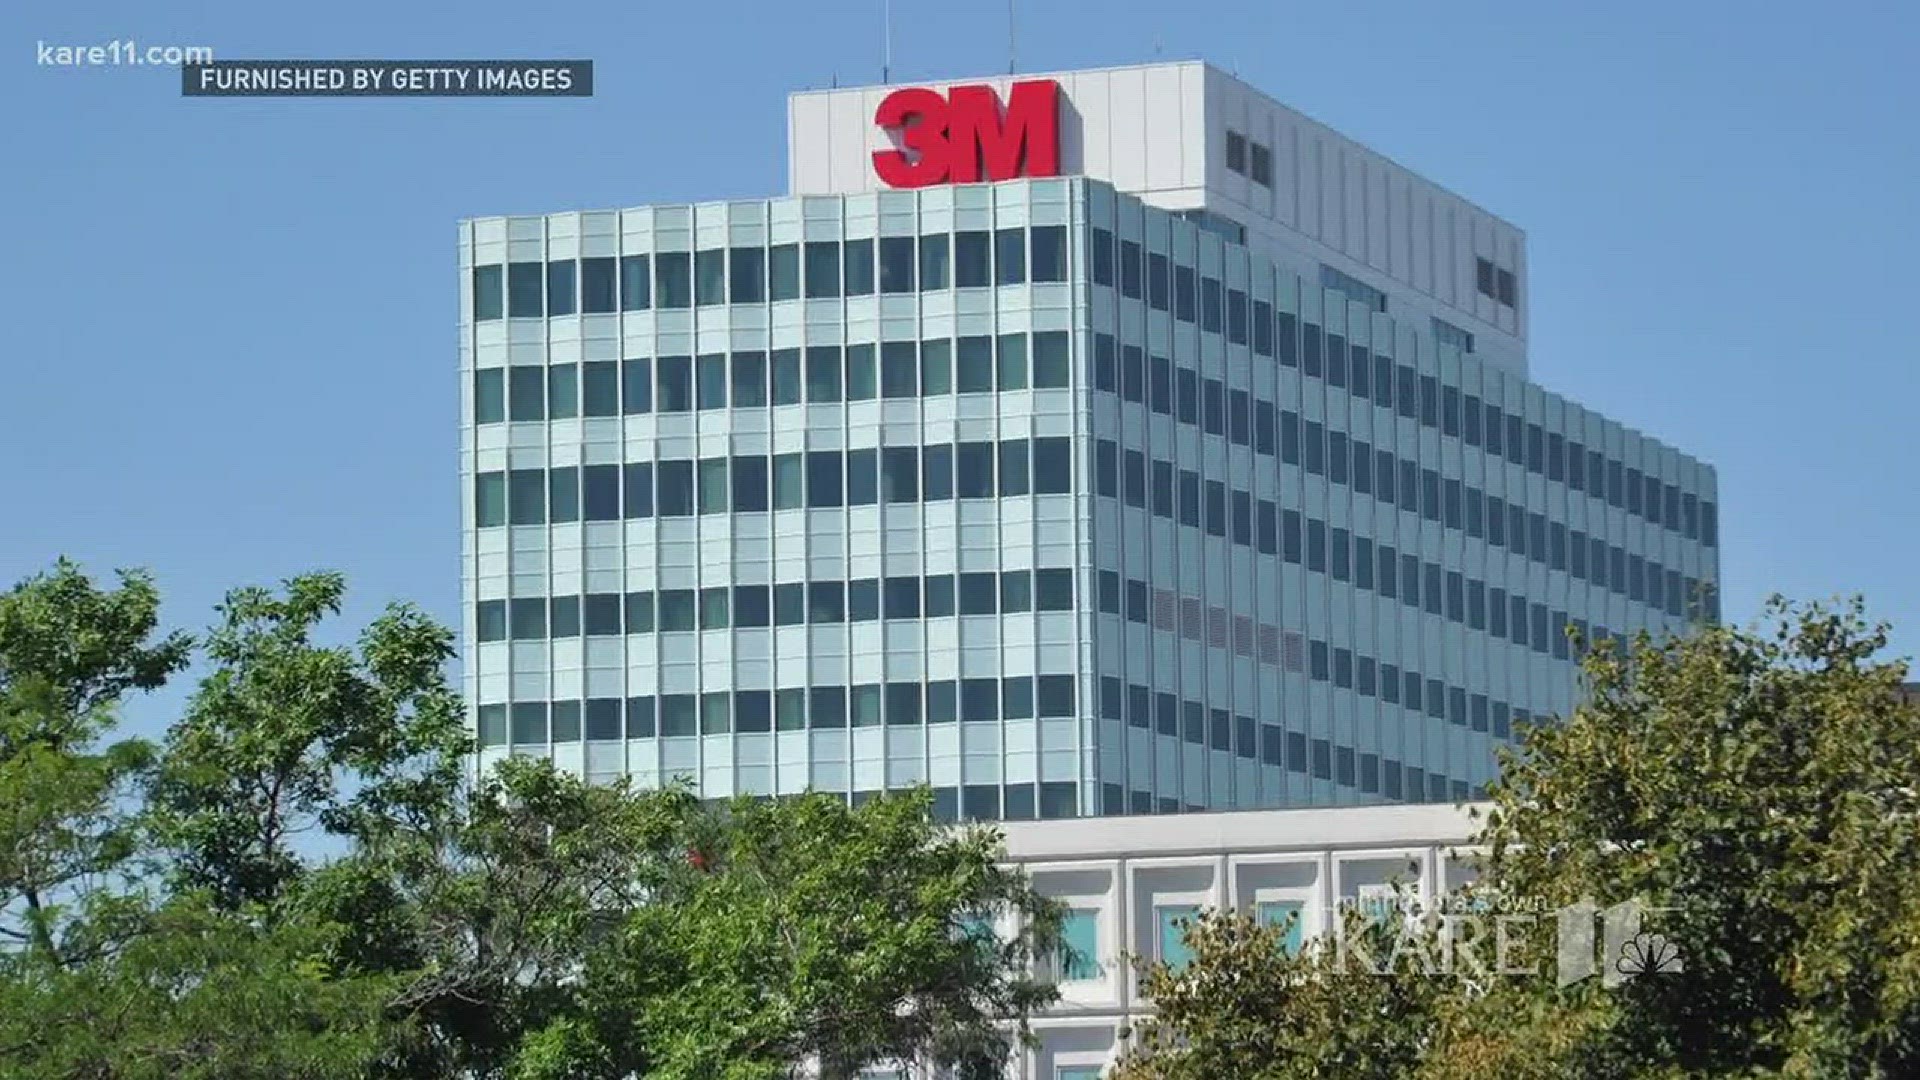 Minnesota officials will soon try to convince a jury that manufacturer 3M Co. should pay the state $5 billion to help clean up environmental damage it alleges was caused by pollutants the company dumped for decades. http://kare11.tv/2CxLcjo